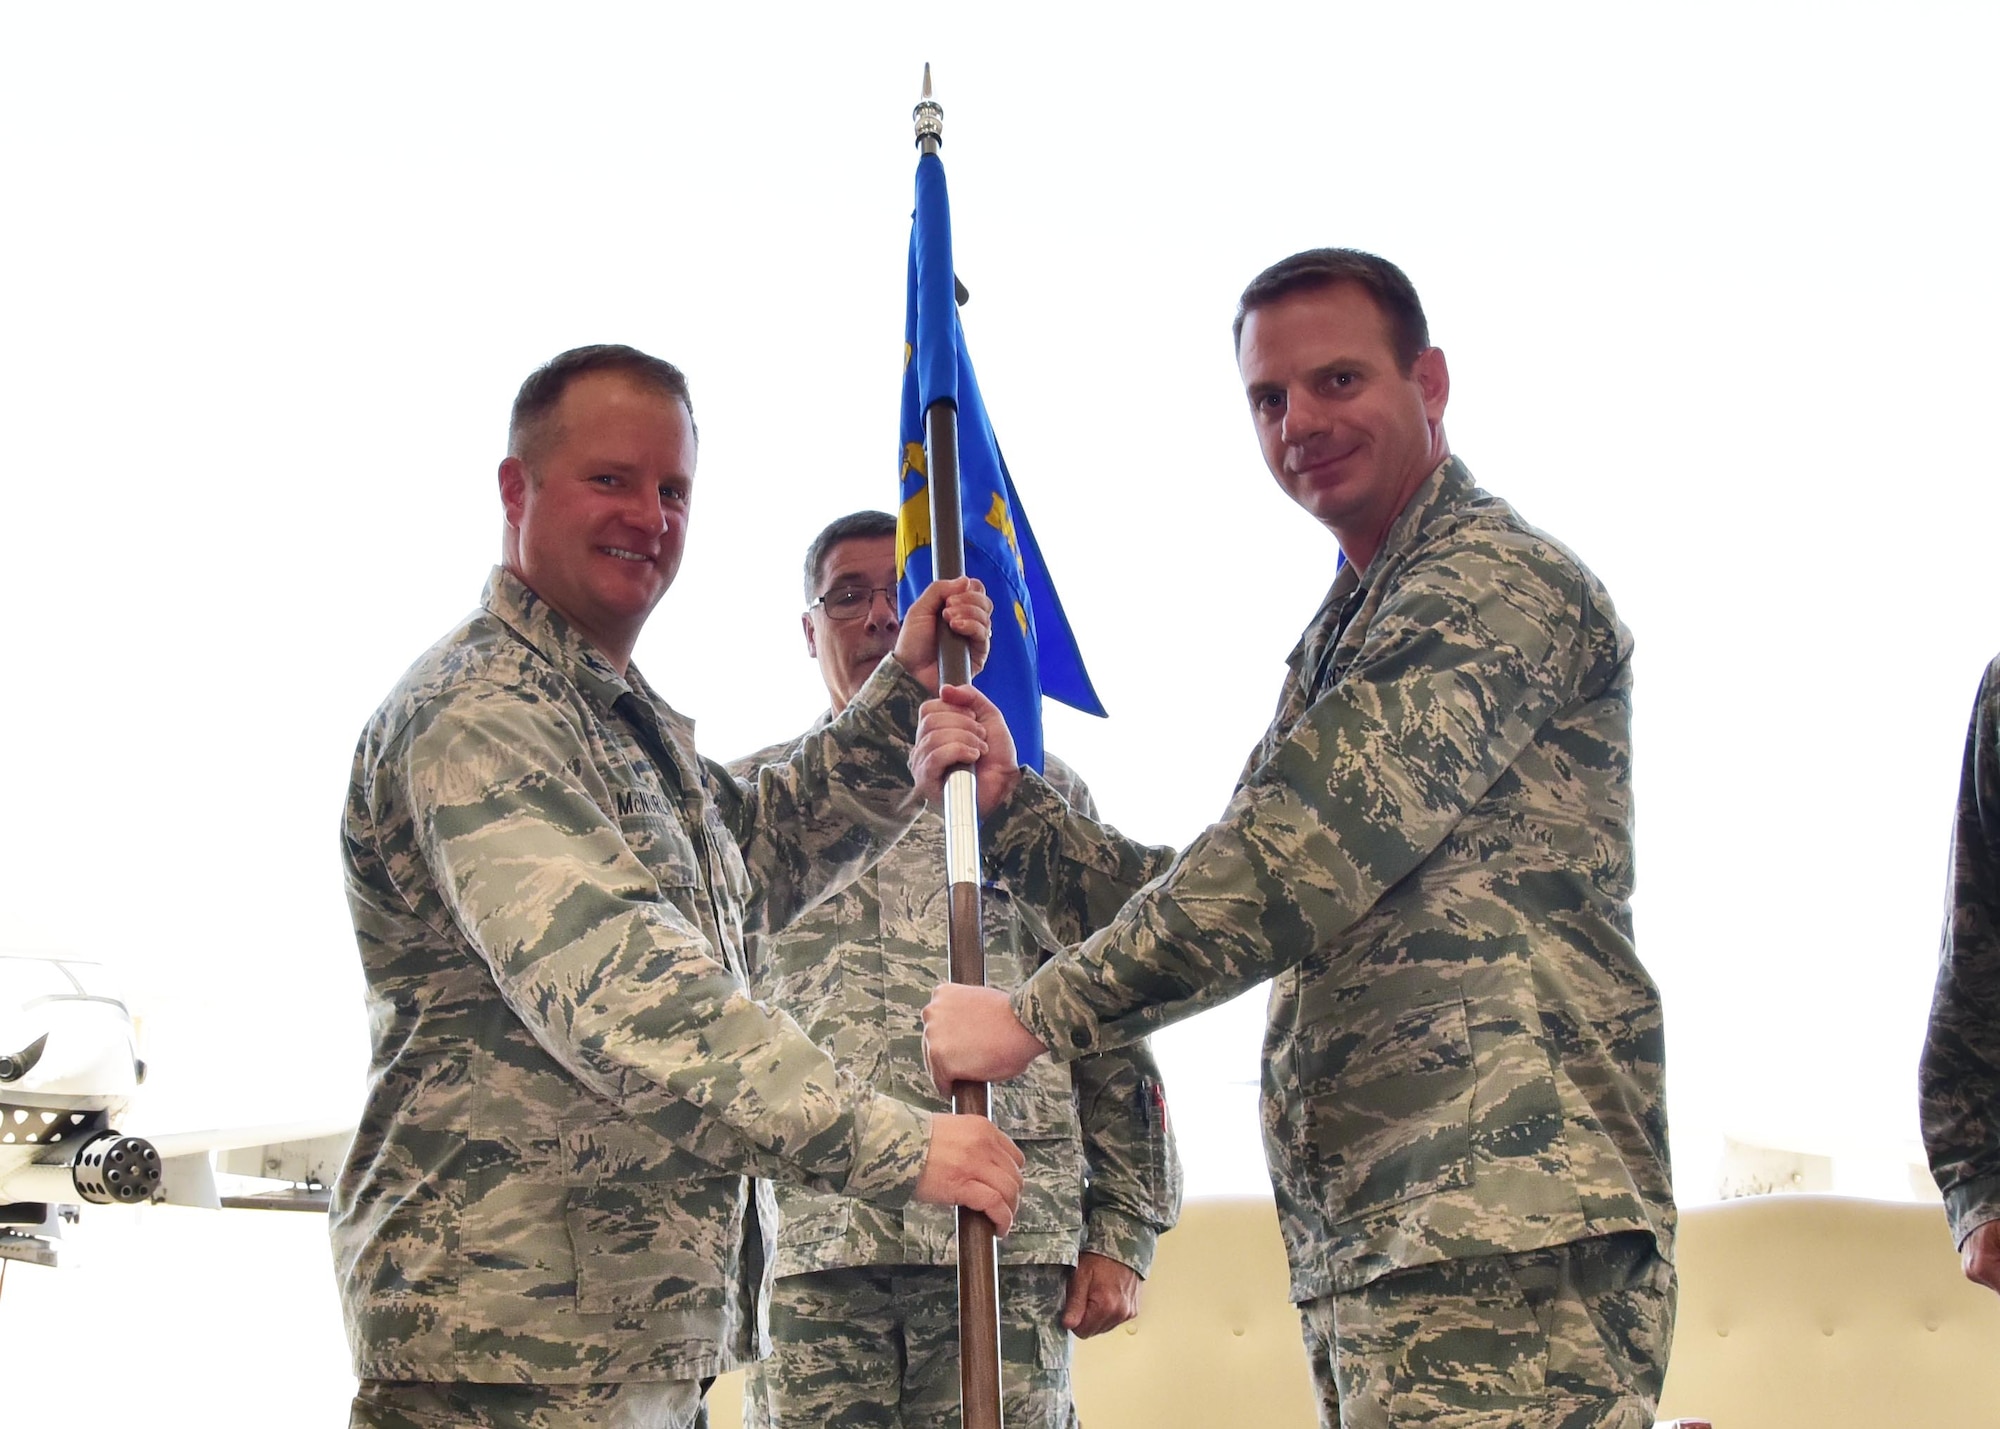 Col. Thomas McNurlin, 924th Fighter Group commander, hands a guidon to Maj. Bobby Cheek who takes command of the 924th Maintenance Squadron July 9 during a change of command ceremony at Davis-Monthan Air Force Base, Ariz. (U.S. Air Force photo by Tech. Sgt. Louis Vega Jr.)